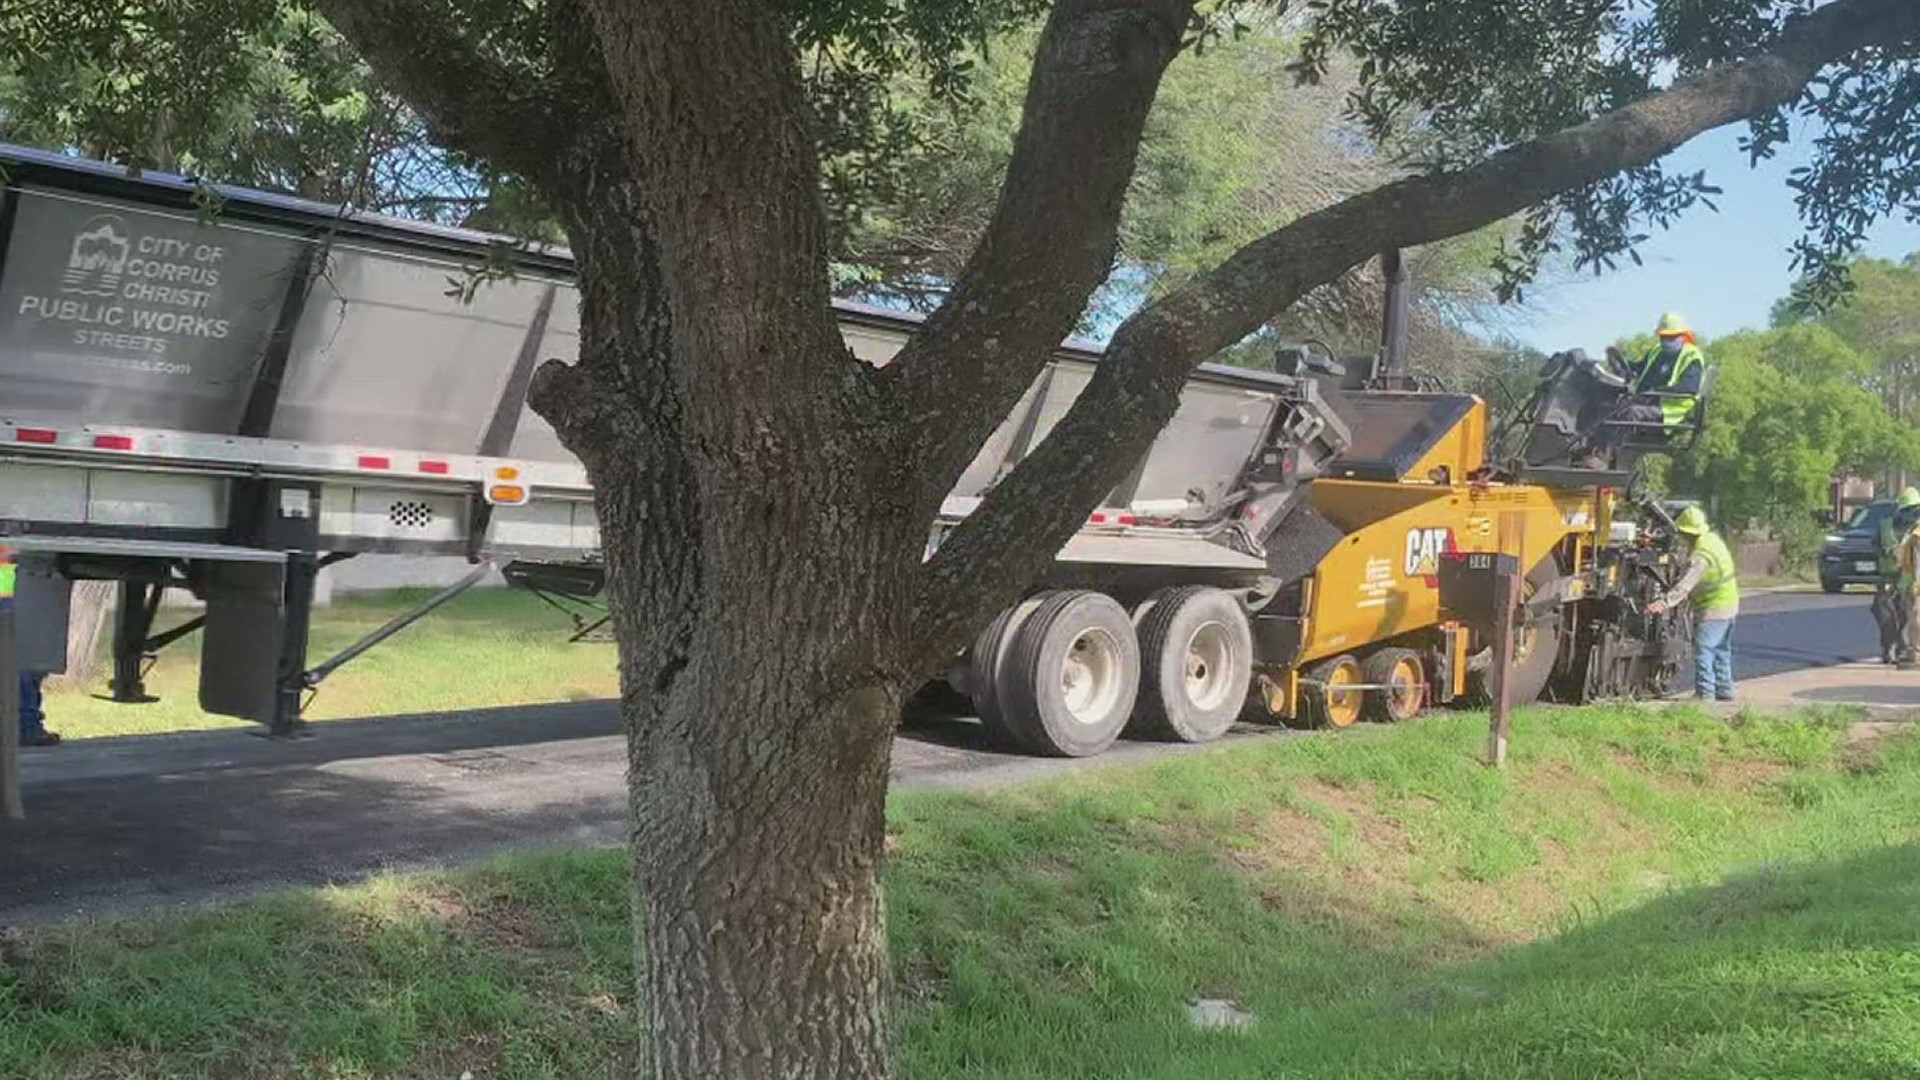 This stage of the program is expected to resurface 40 miles of residential streets before the end of the year.